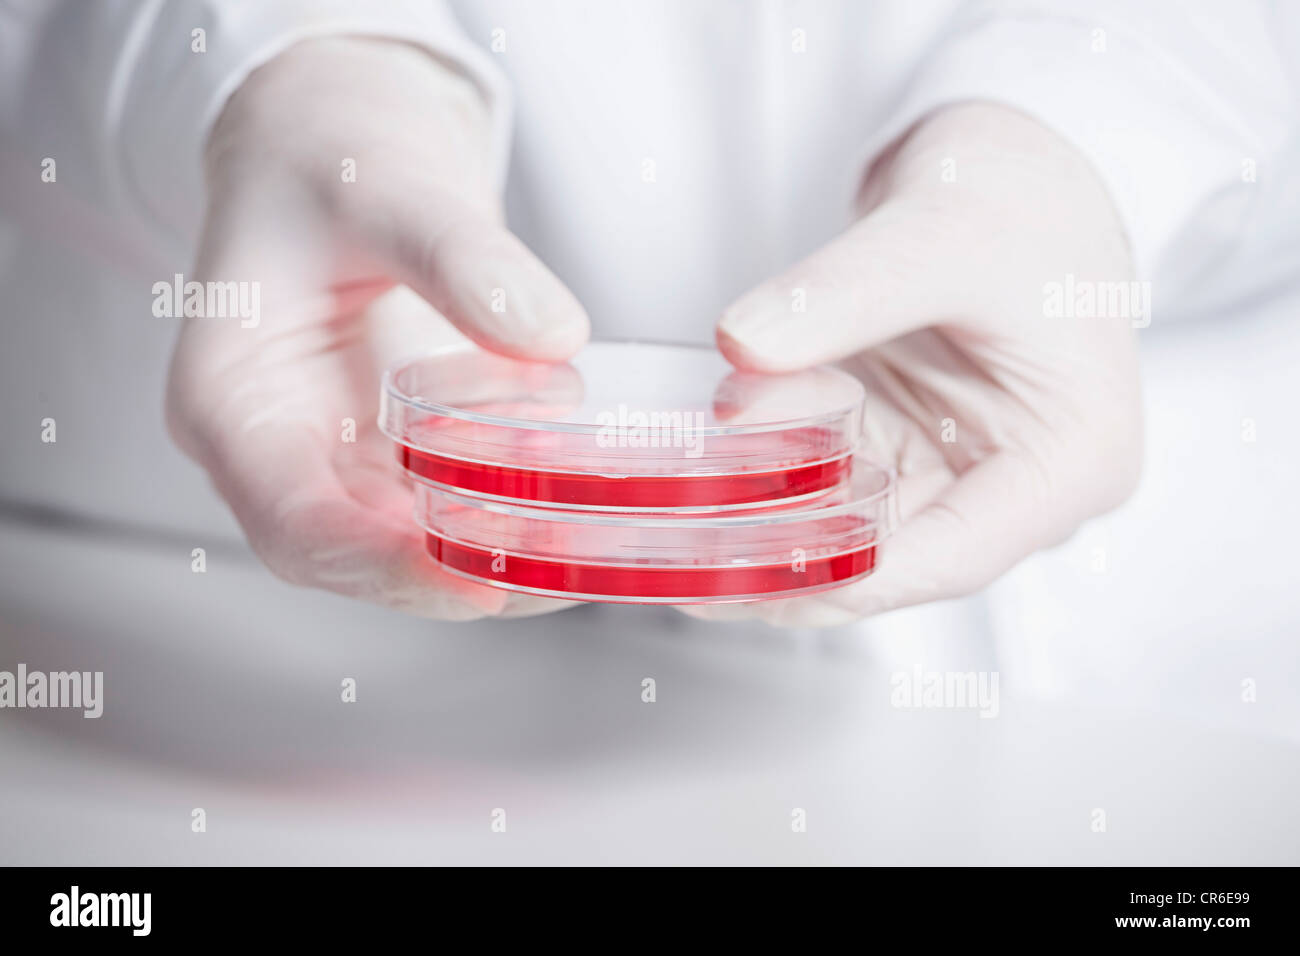 Germany, Bavaria, Munich, Scientist holding red liquid in petri dish for medical research in laboratory Stock Photo